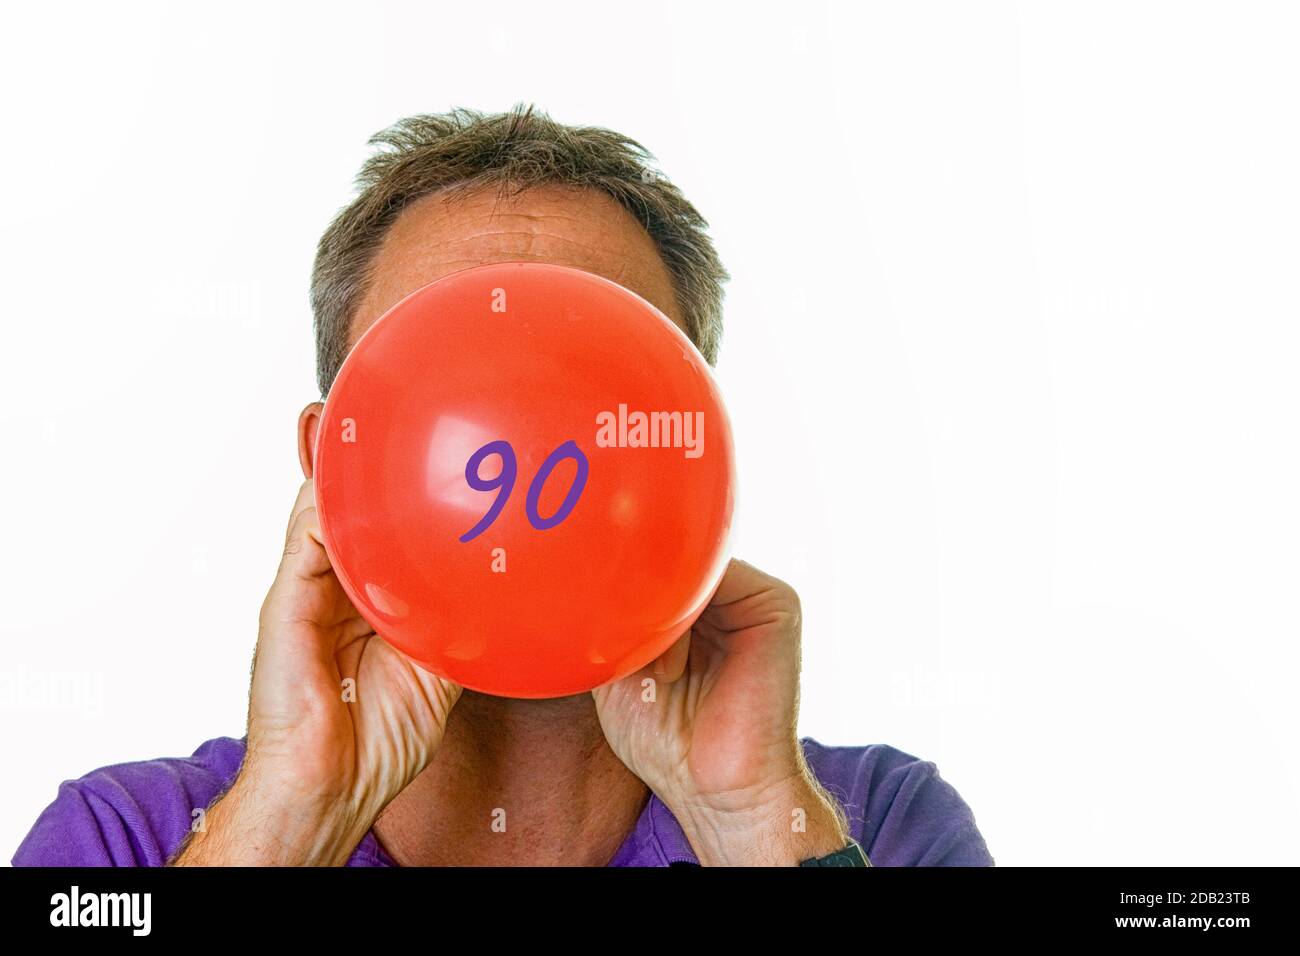 Man blowing red balloon with number 90 Stock Photo